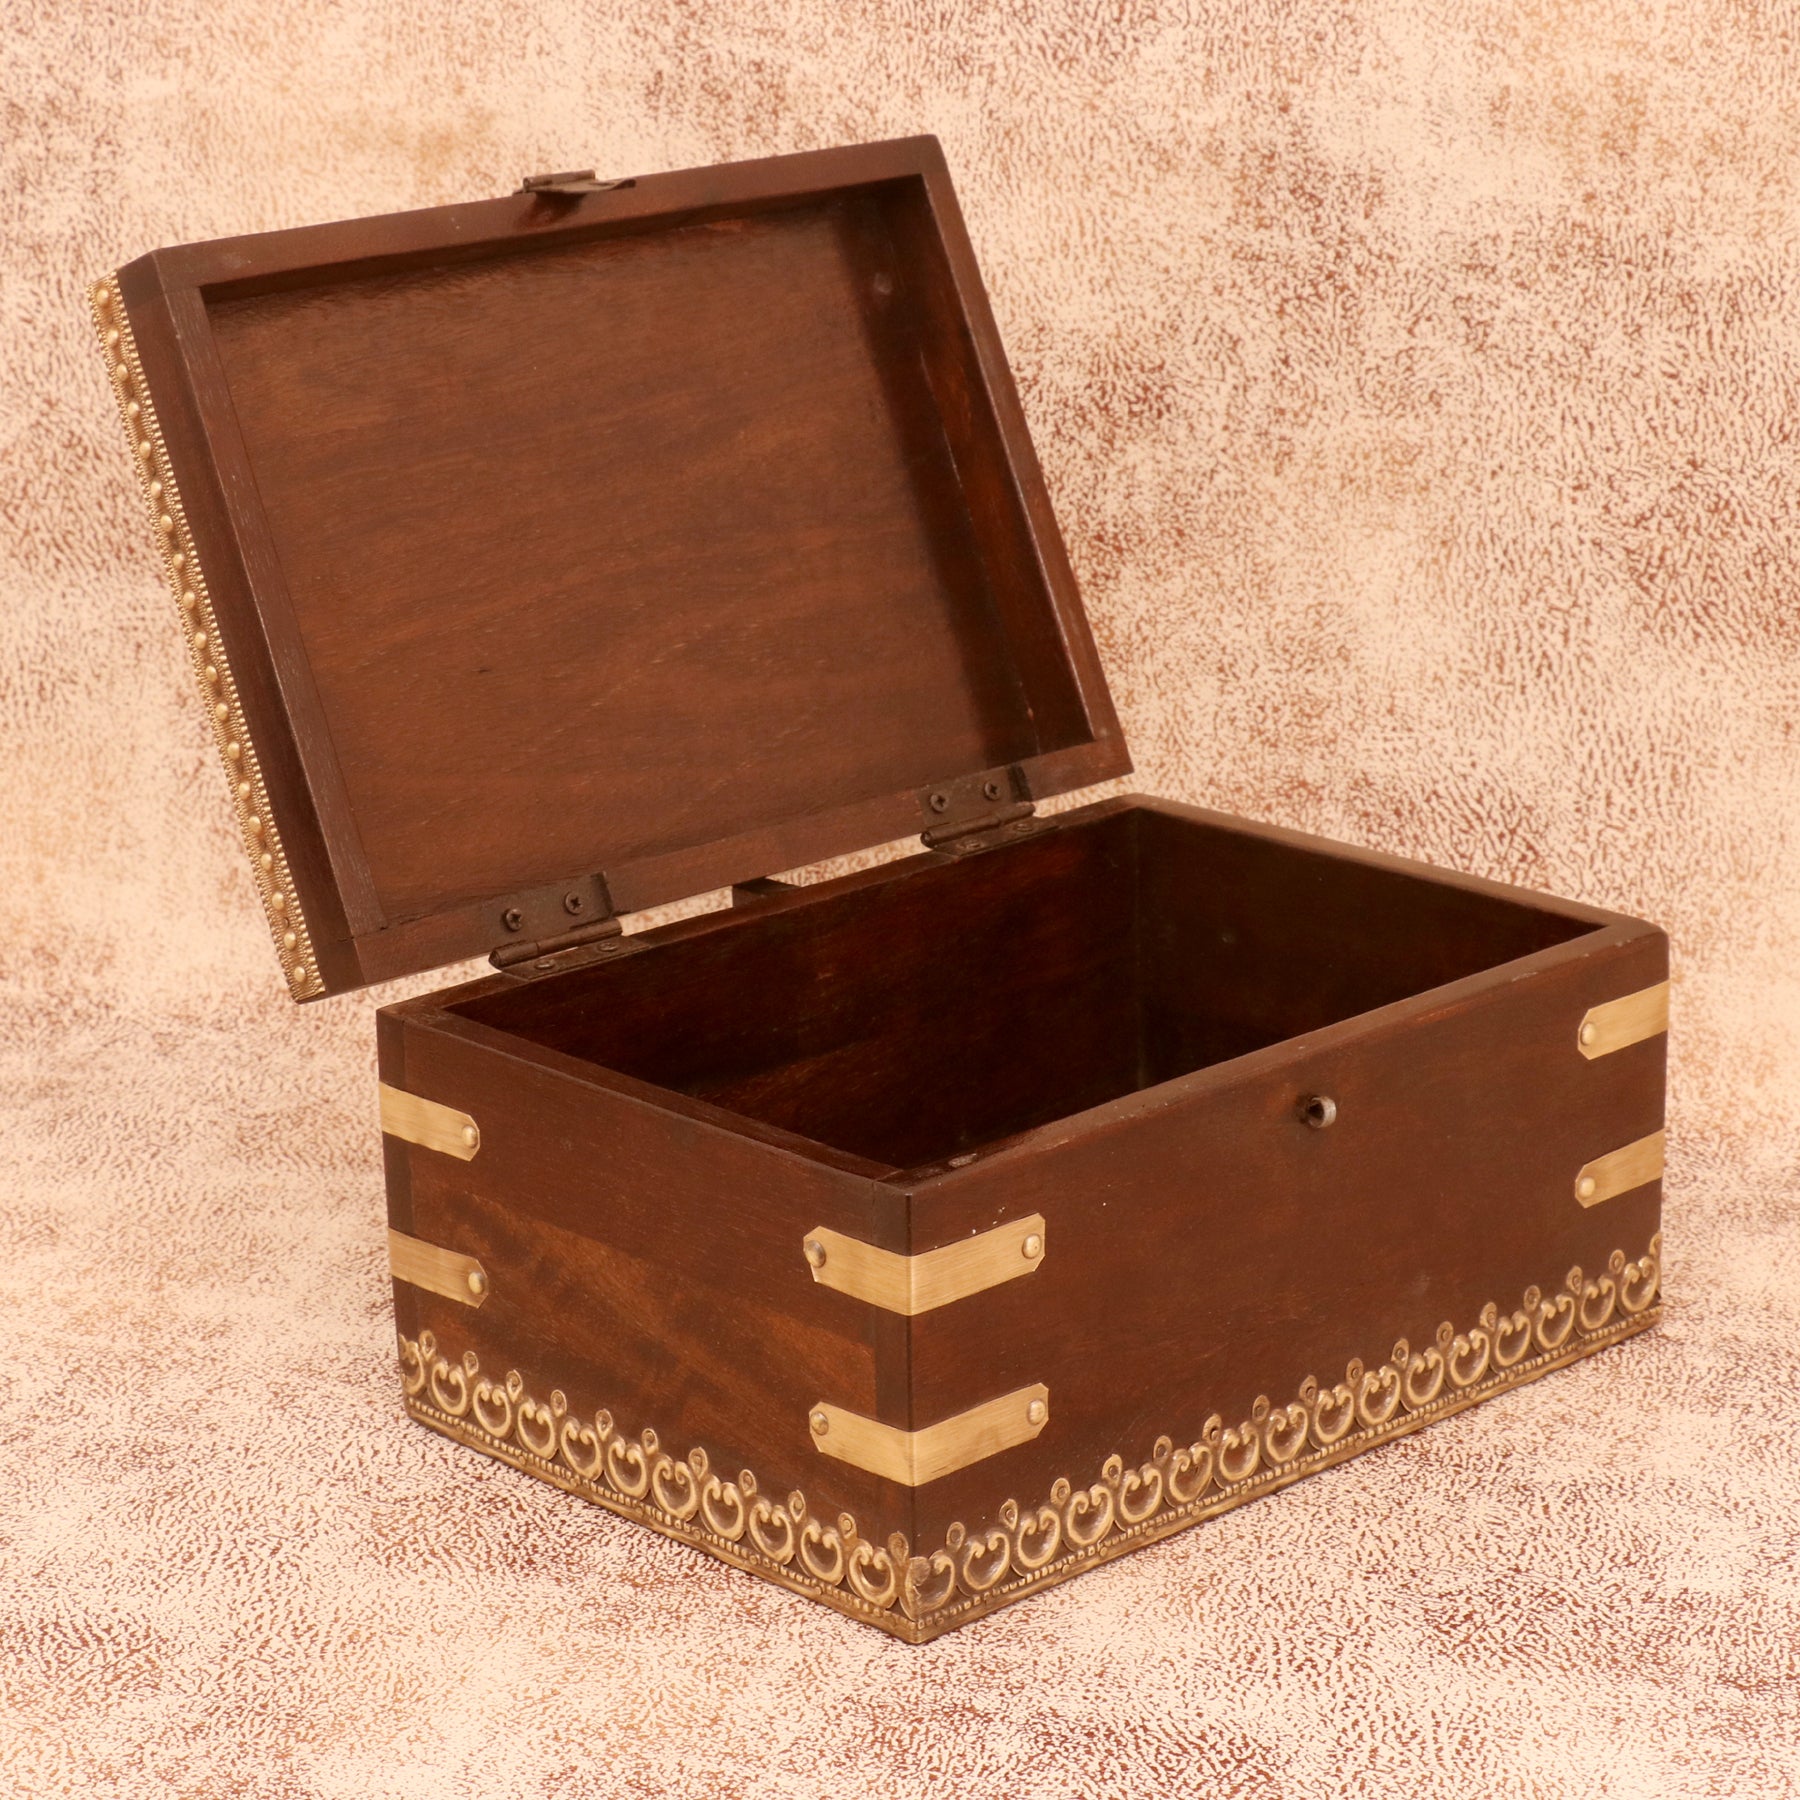 Wooden Classic Boxes Large (13 x 10 x 8 Inch) Wooden Box